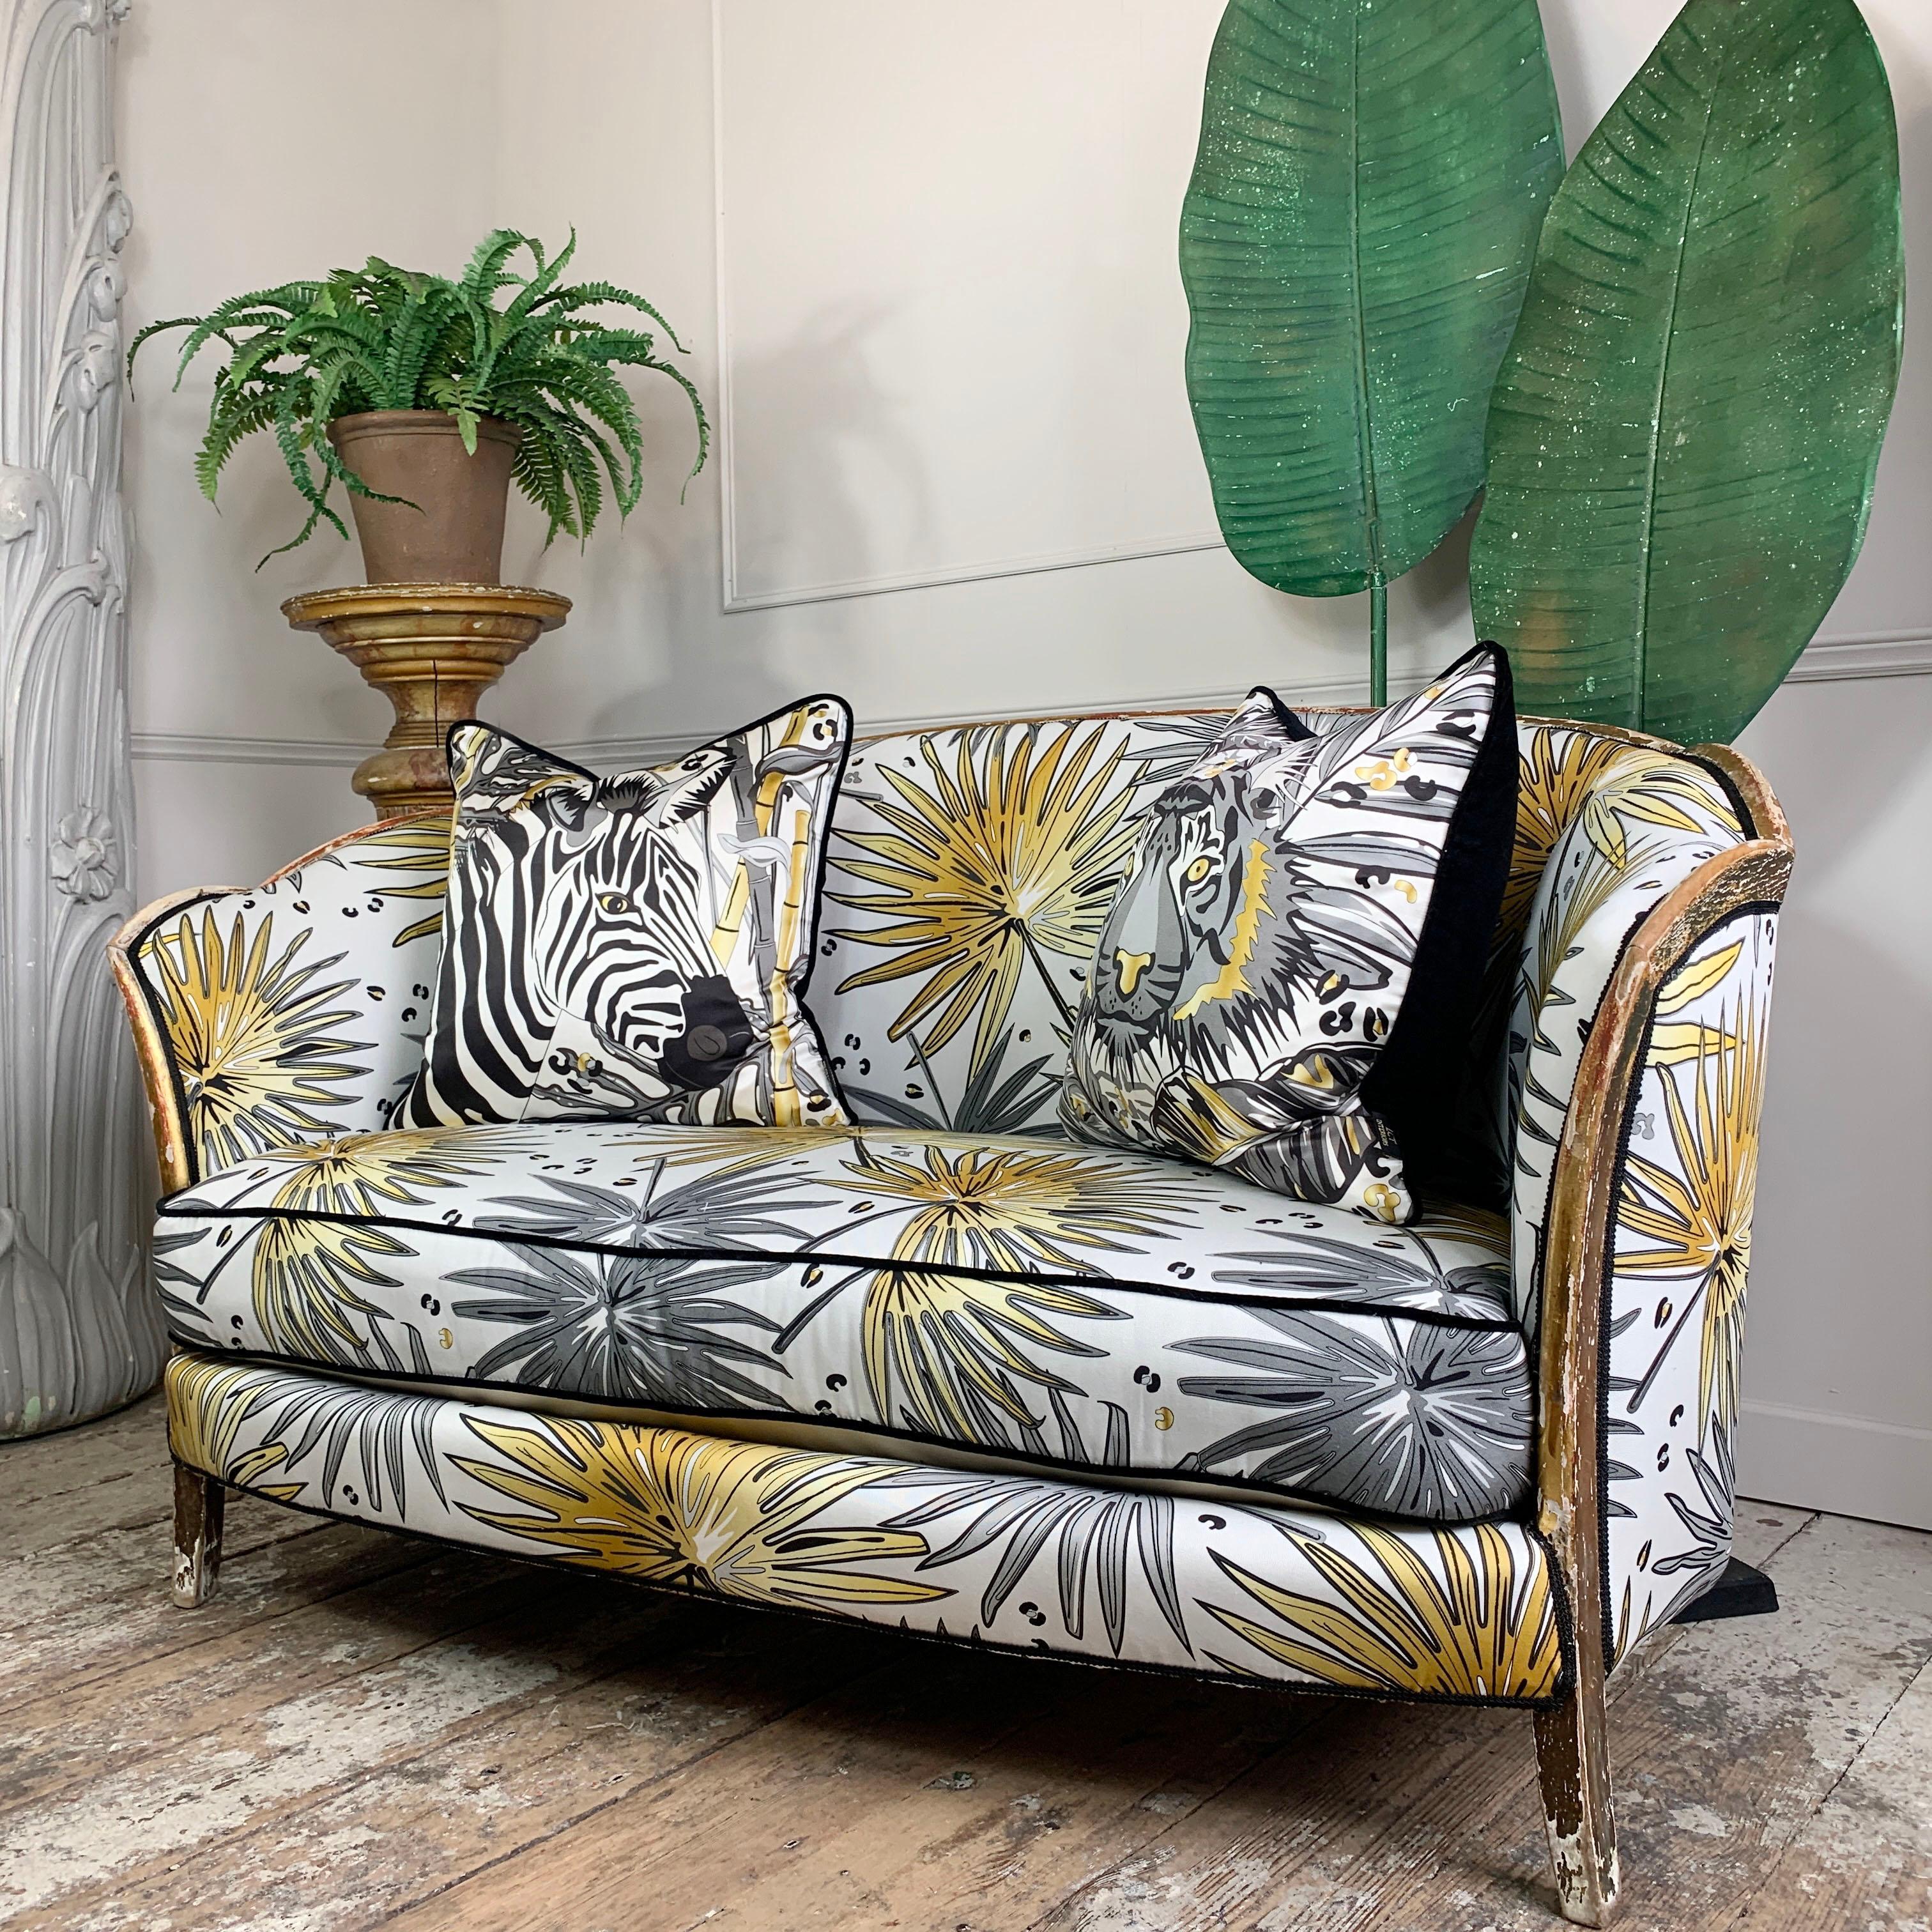 Napoleon III Antique French Parlour Settee in Tropics 'Fan Palm' Fabric For Sale